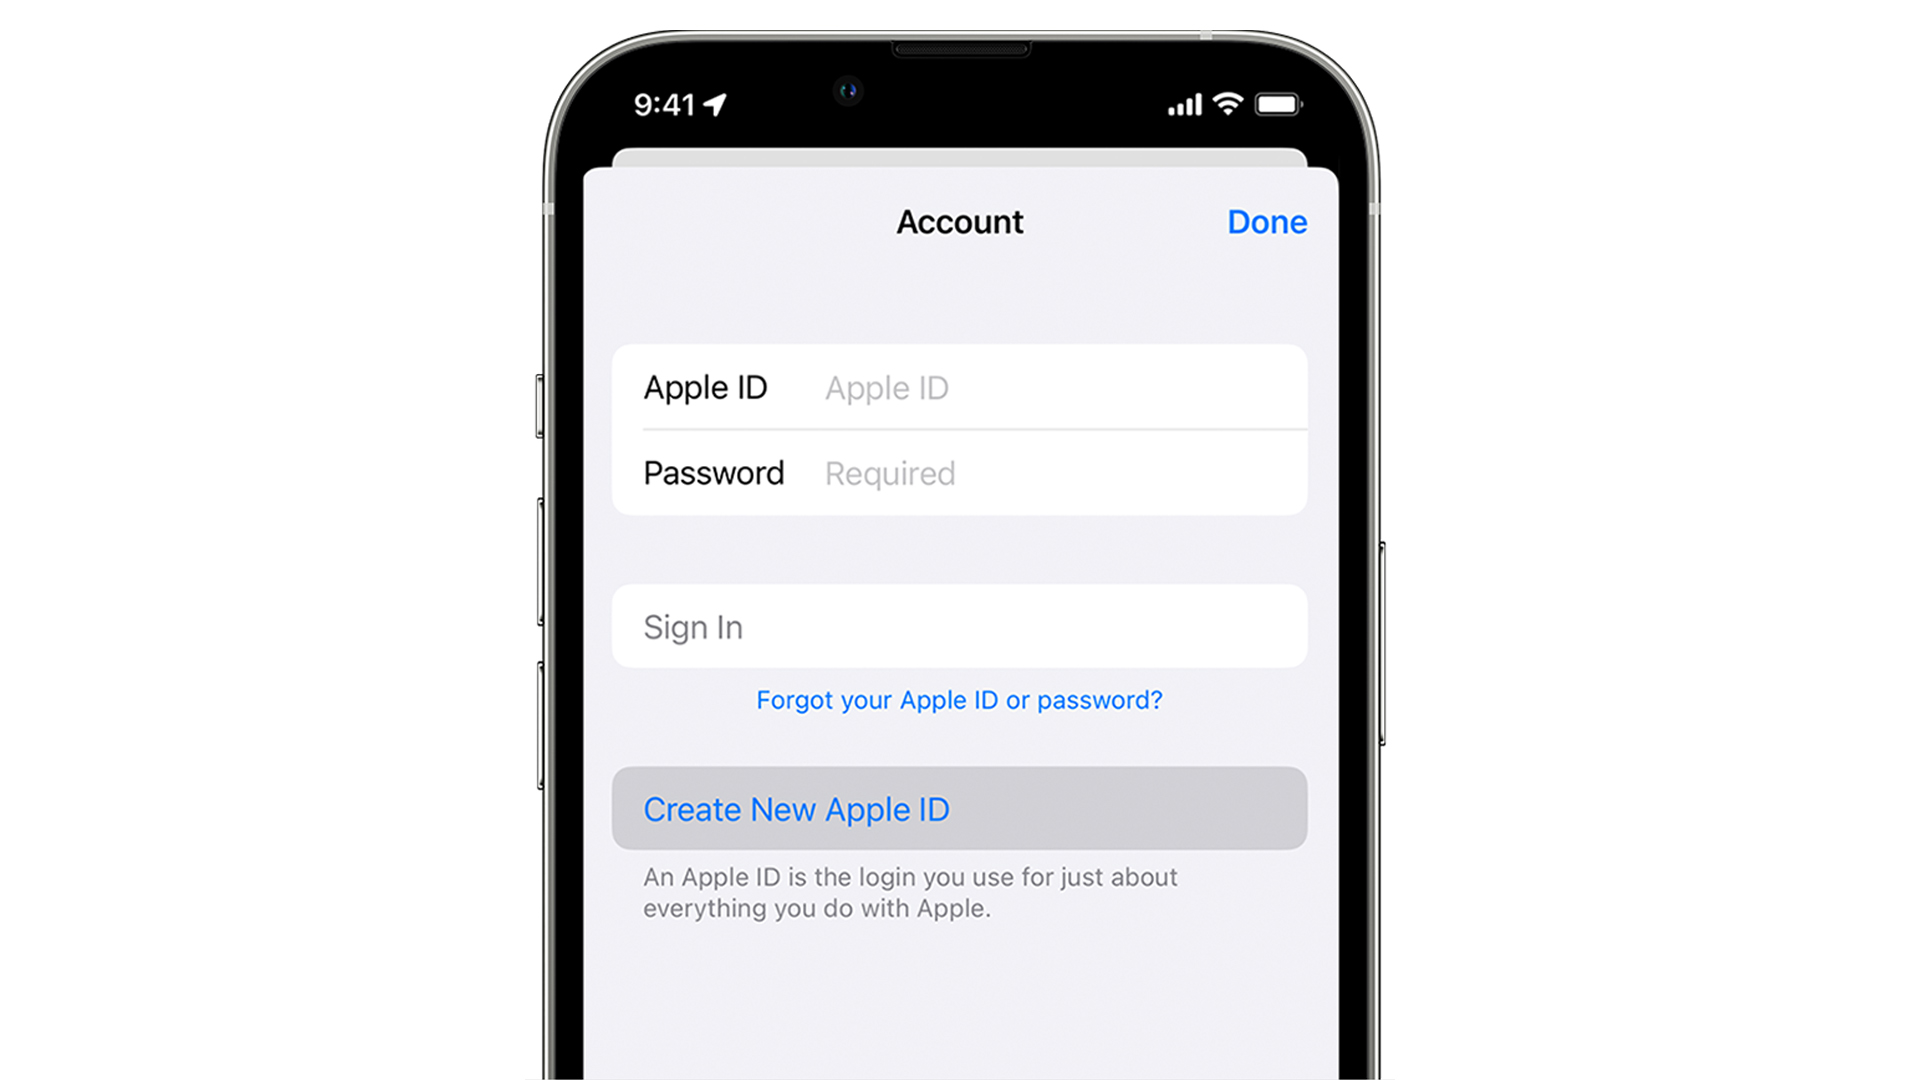 Creating a new Apple ID on iPhone